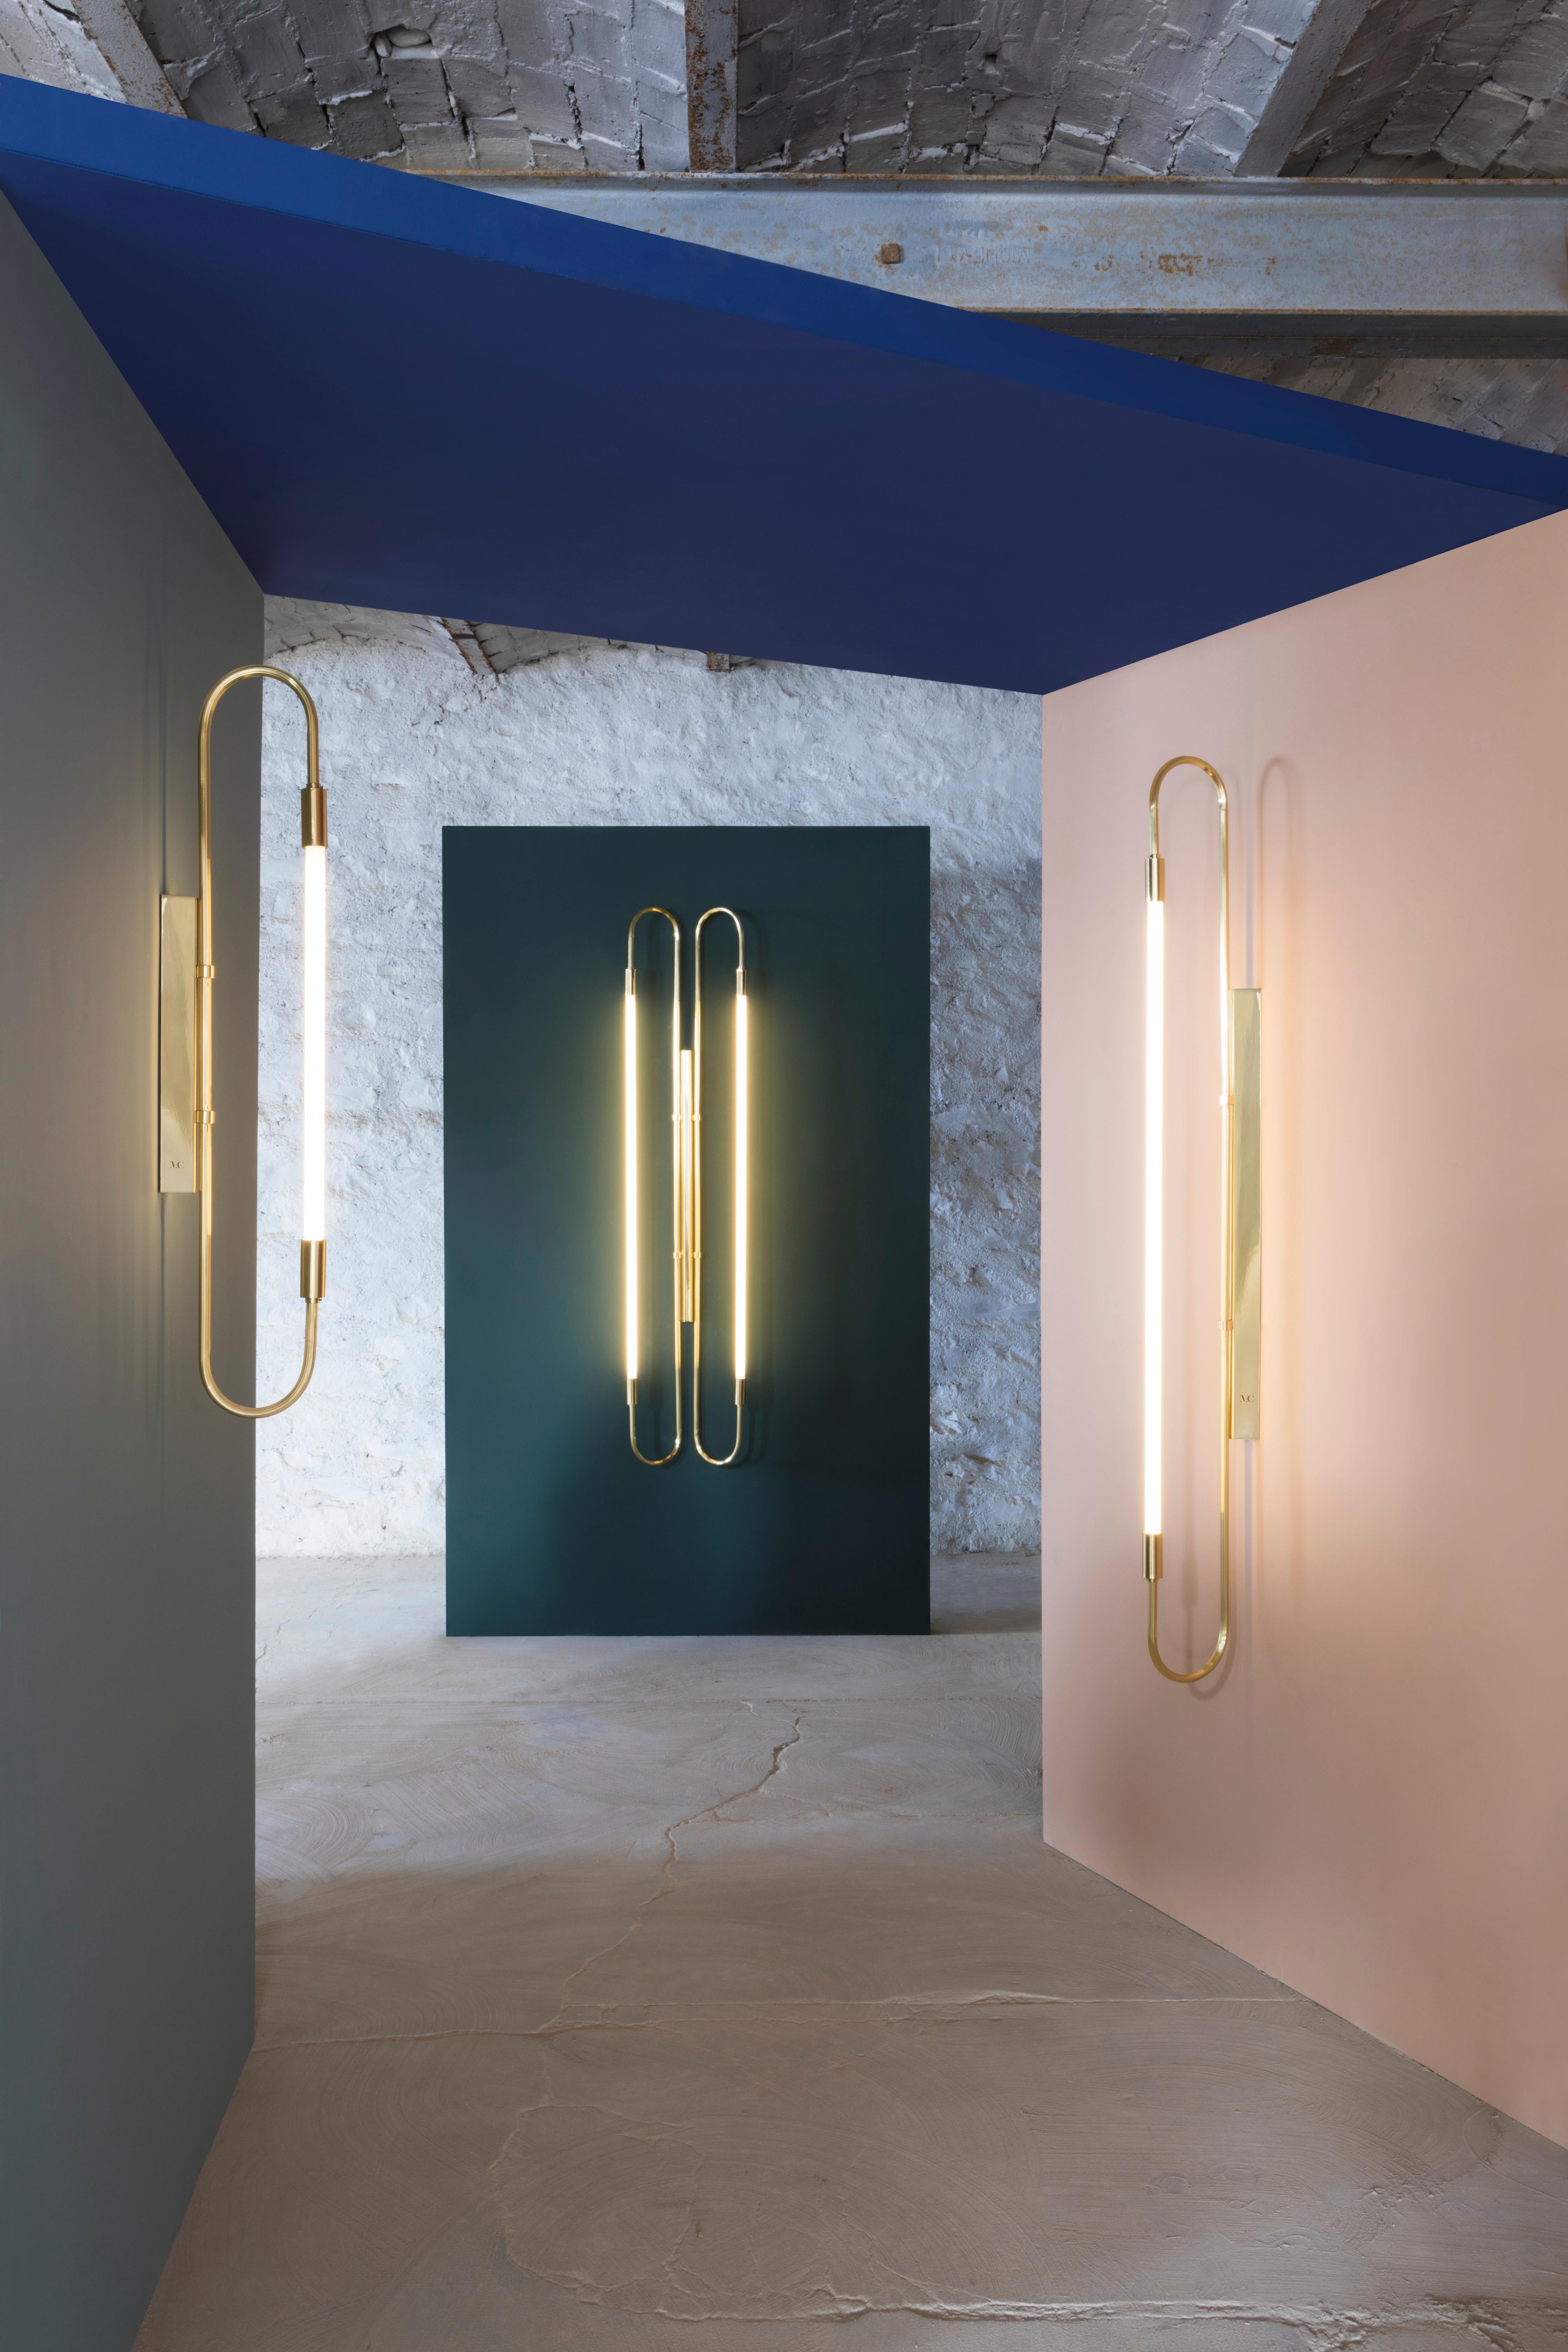 Nickel wall lamp neon double 103 by Magic Circus Editions
Dimensions: H. 103 cm, W. 37 cm, D. 11 cm, 3.6 kg.
Materials: fluted brass tube and glass.
Available finishes: brass (lacquered polished brass, unlacquered polished brass, brushed brass)